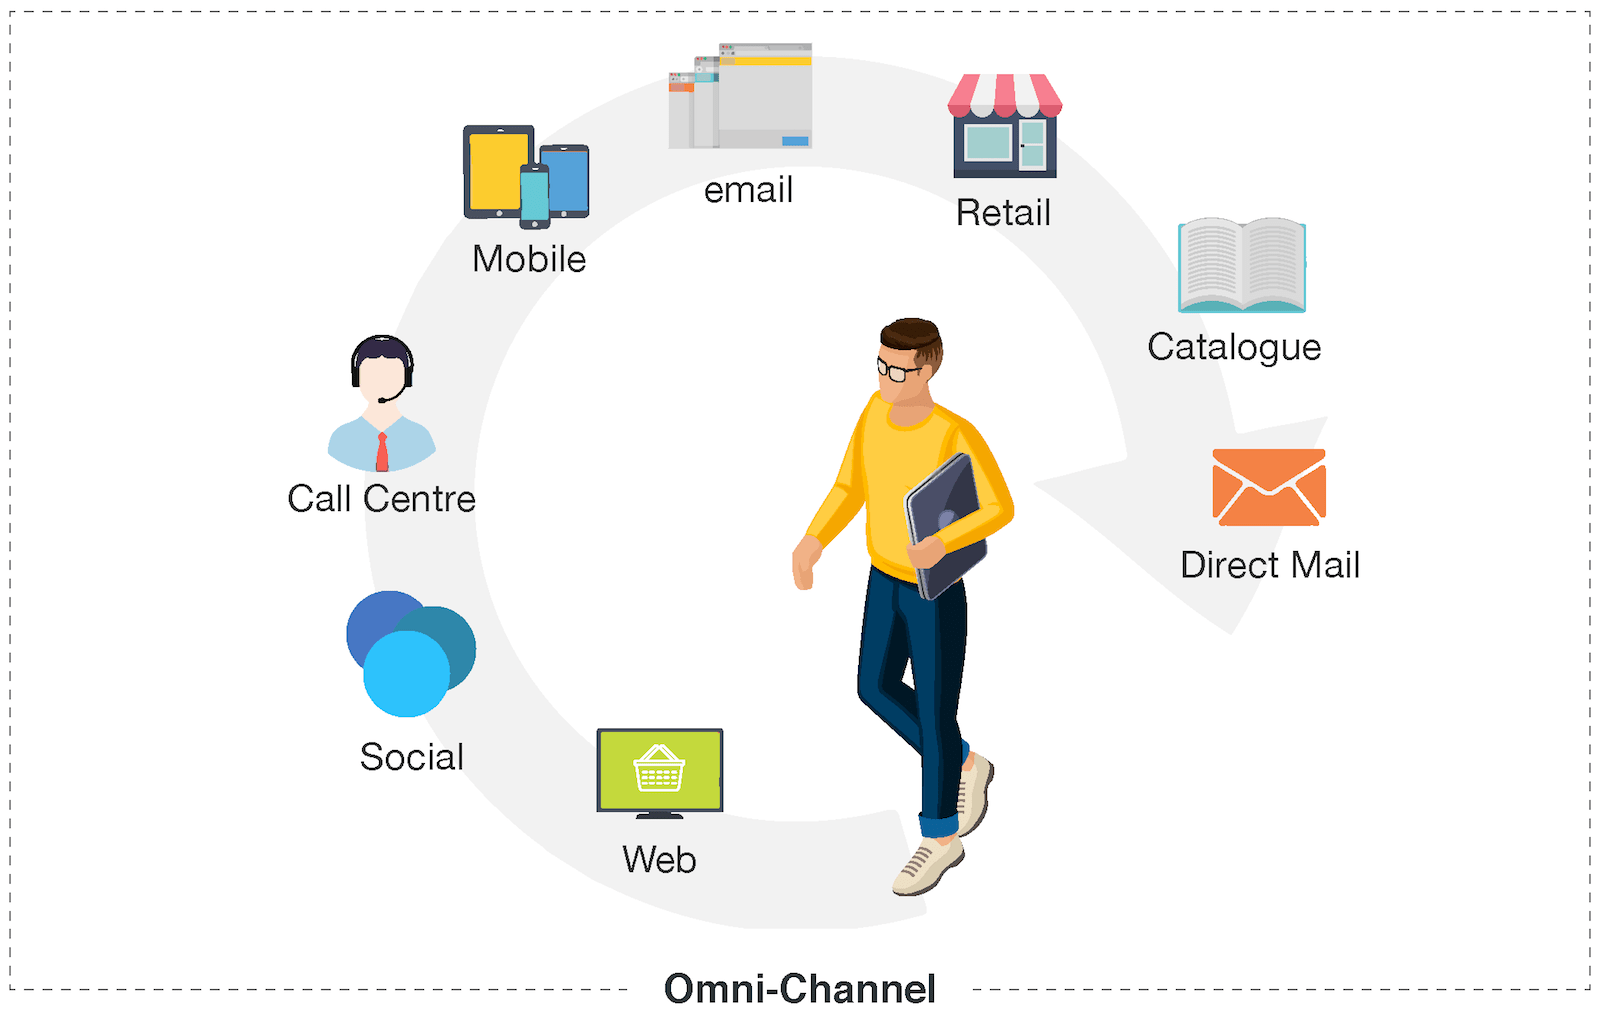 Omnichannel buyer journey: web, social, call centre, mobile, email, retail, catalogue, direct mail